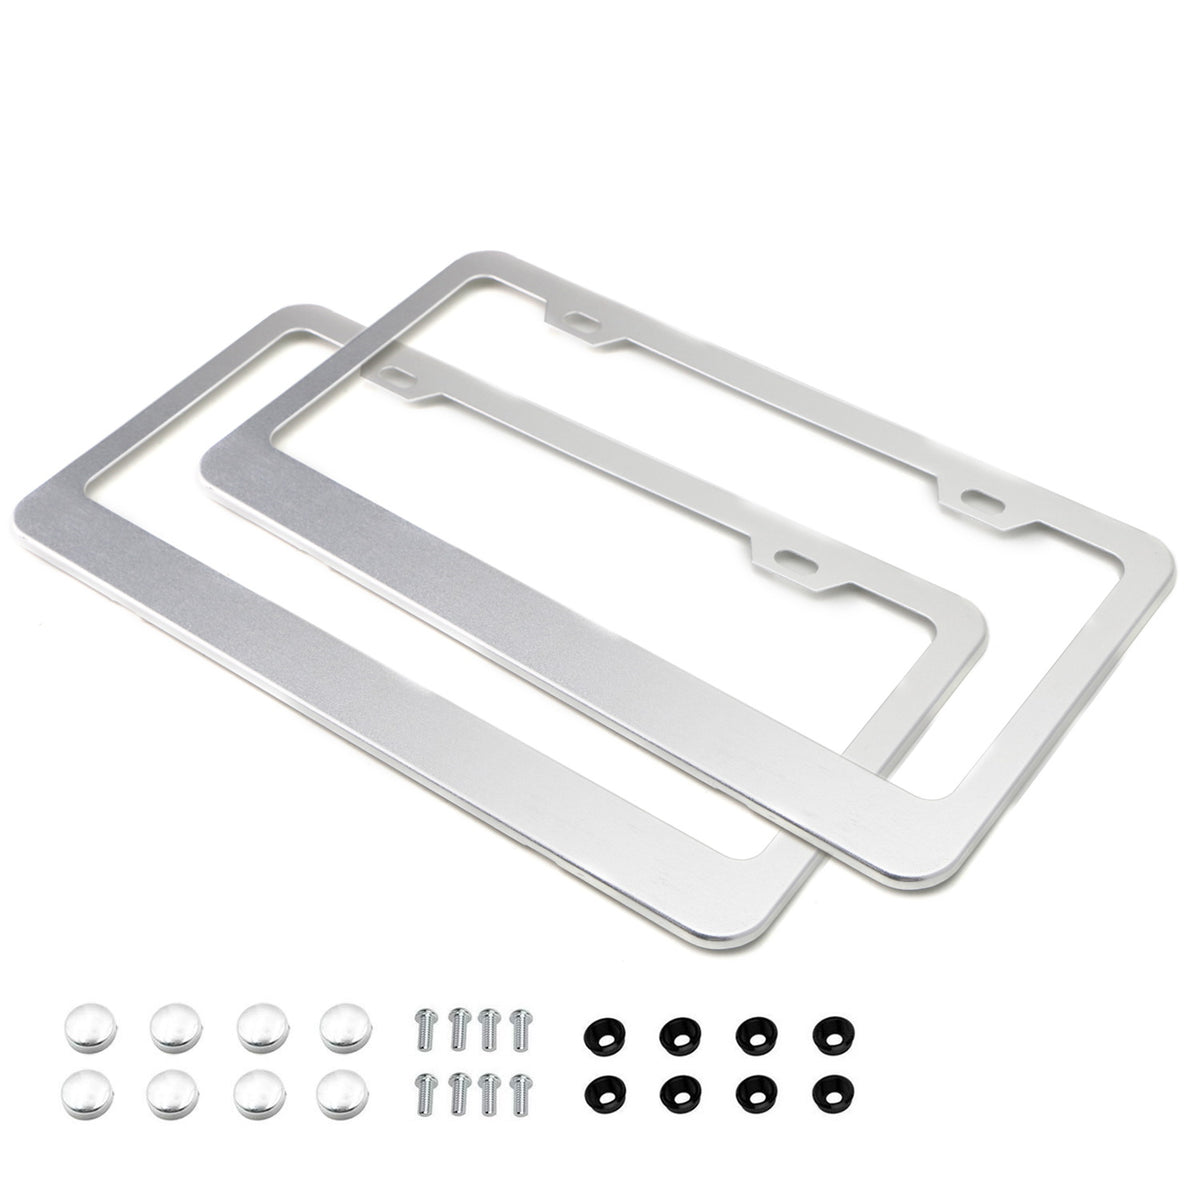 2pc Premium Silver Slim 2-Hole License Plate Frame with Screws/Fasteners   Caps —